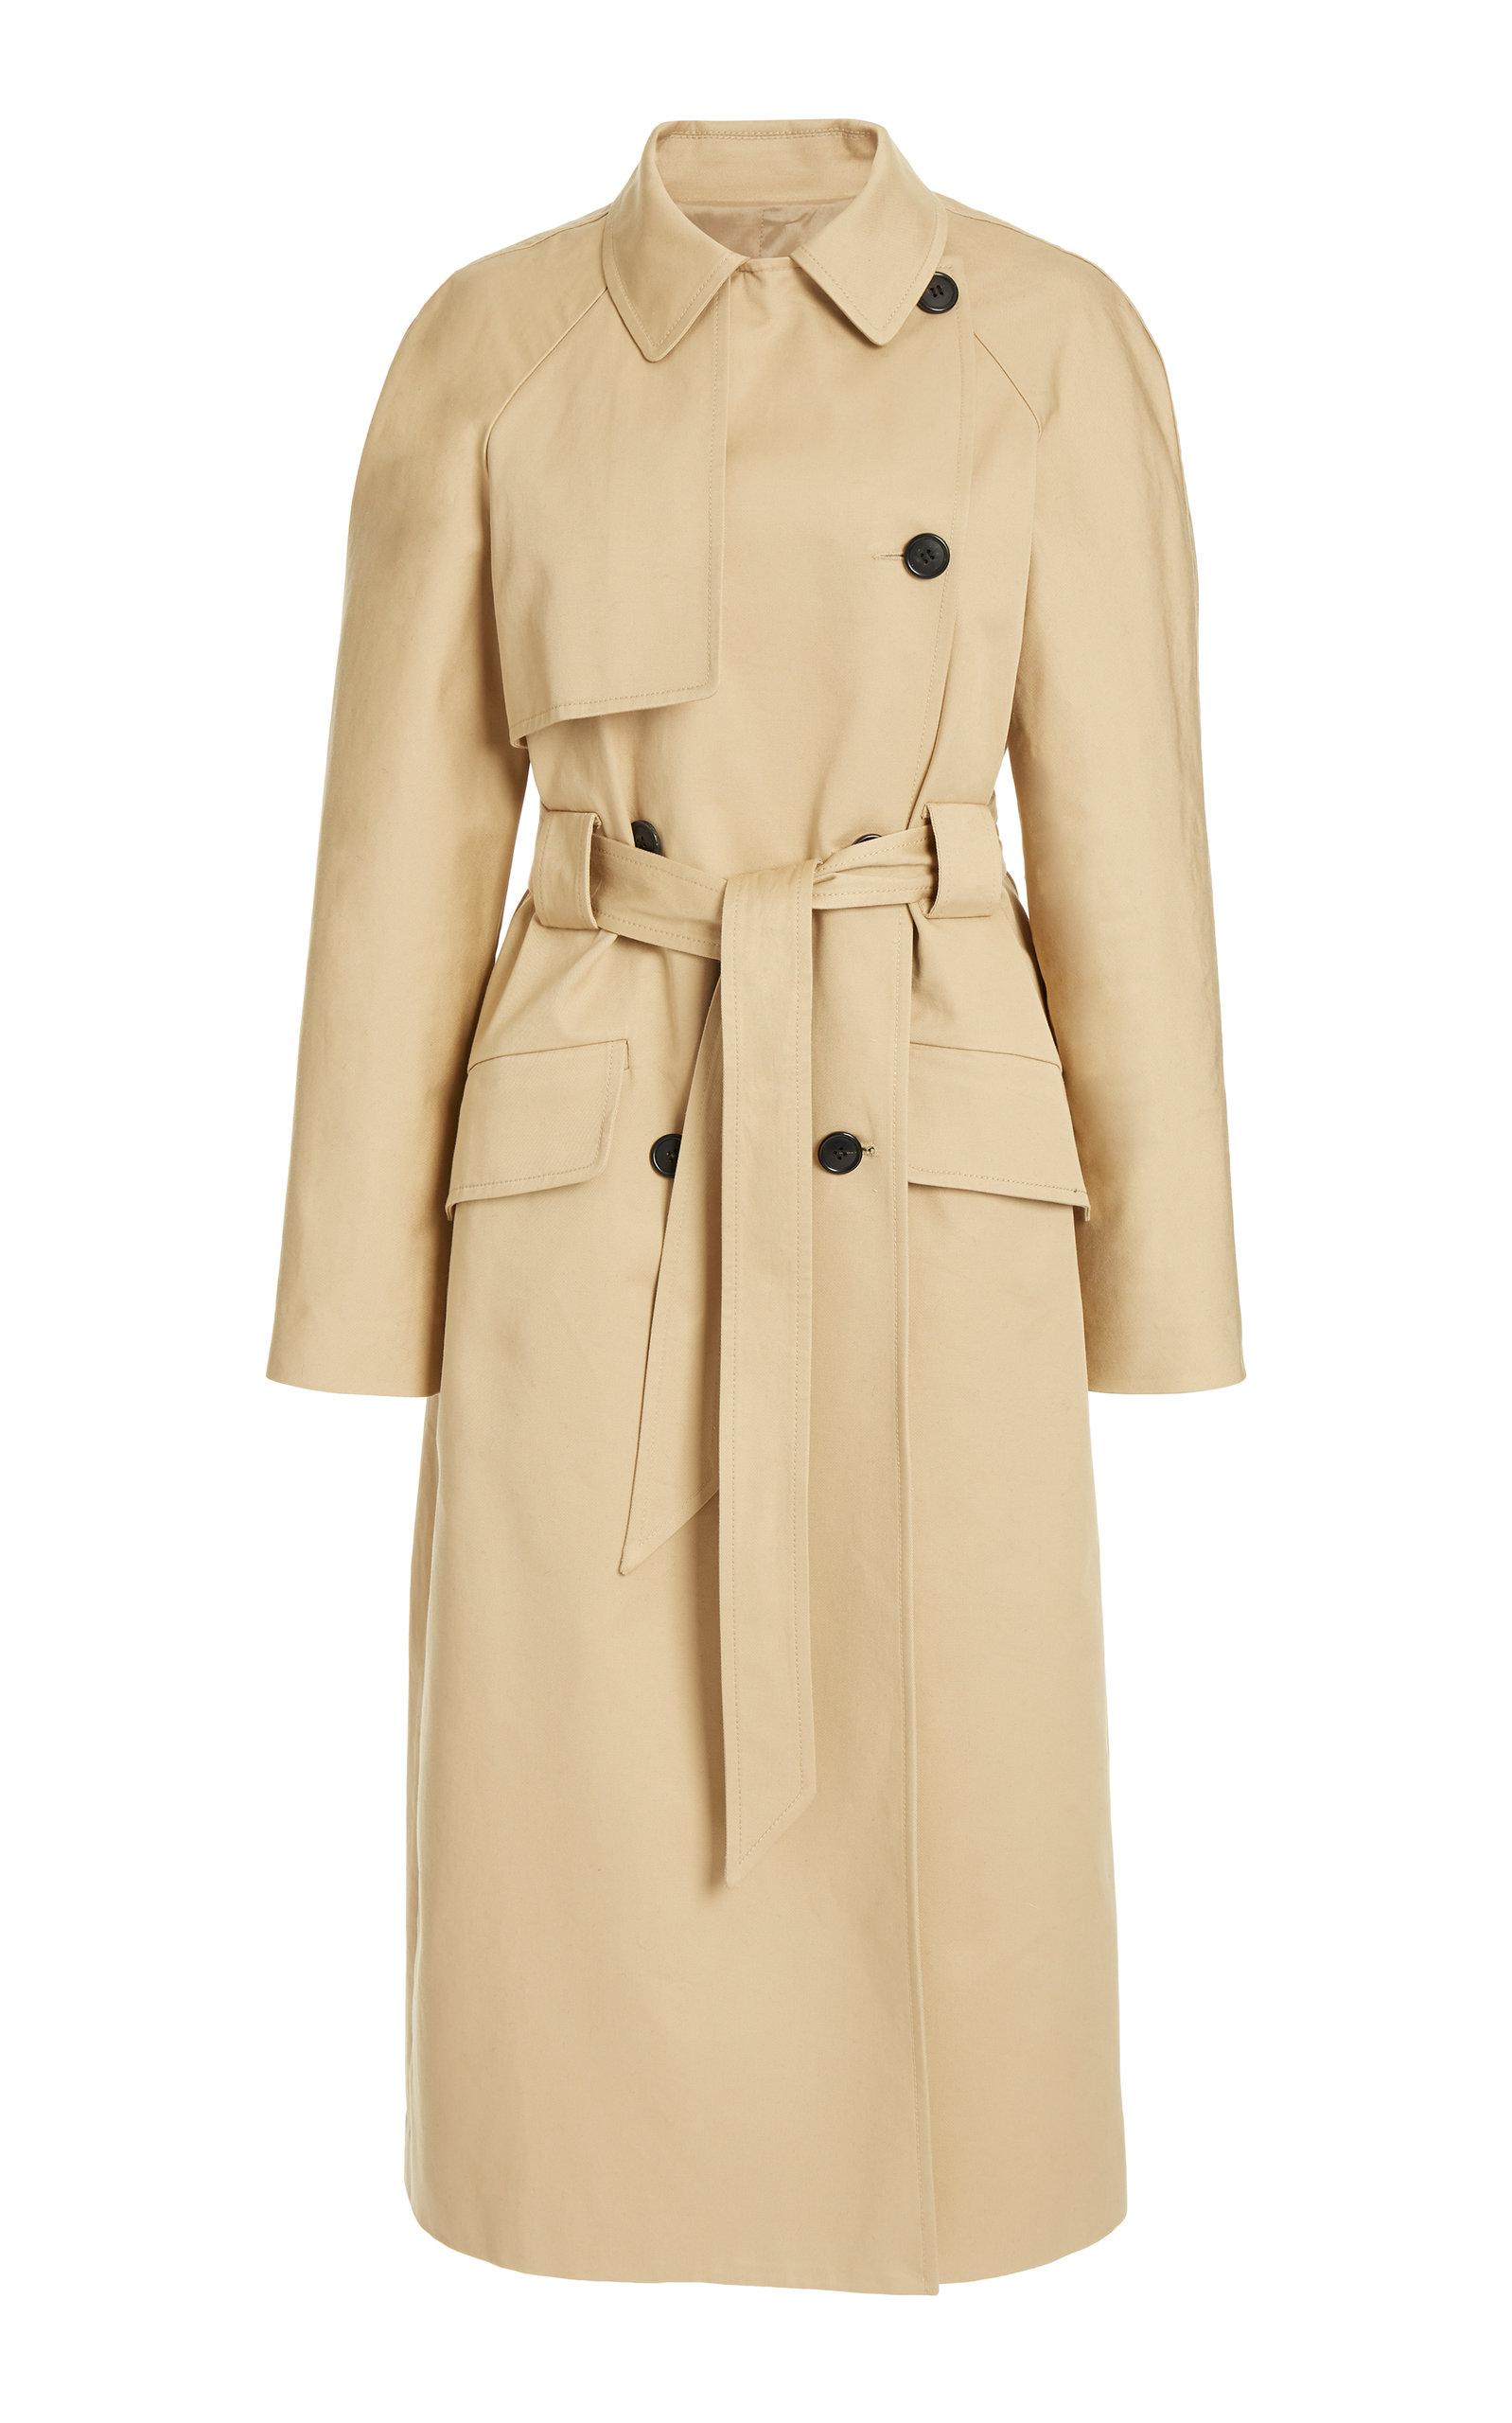 Martin Grant Cotton-gabardine Trench Coat in Natural - Save 49% - Lyst